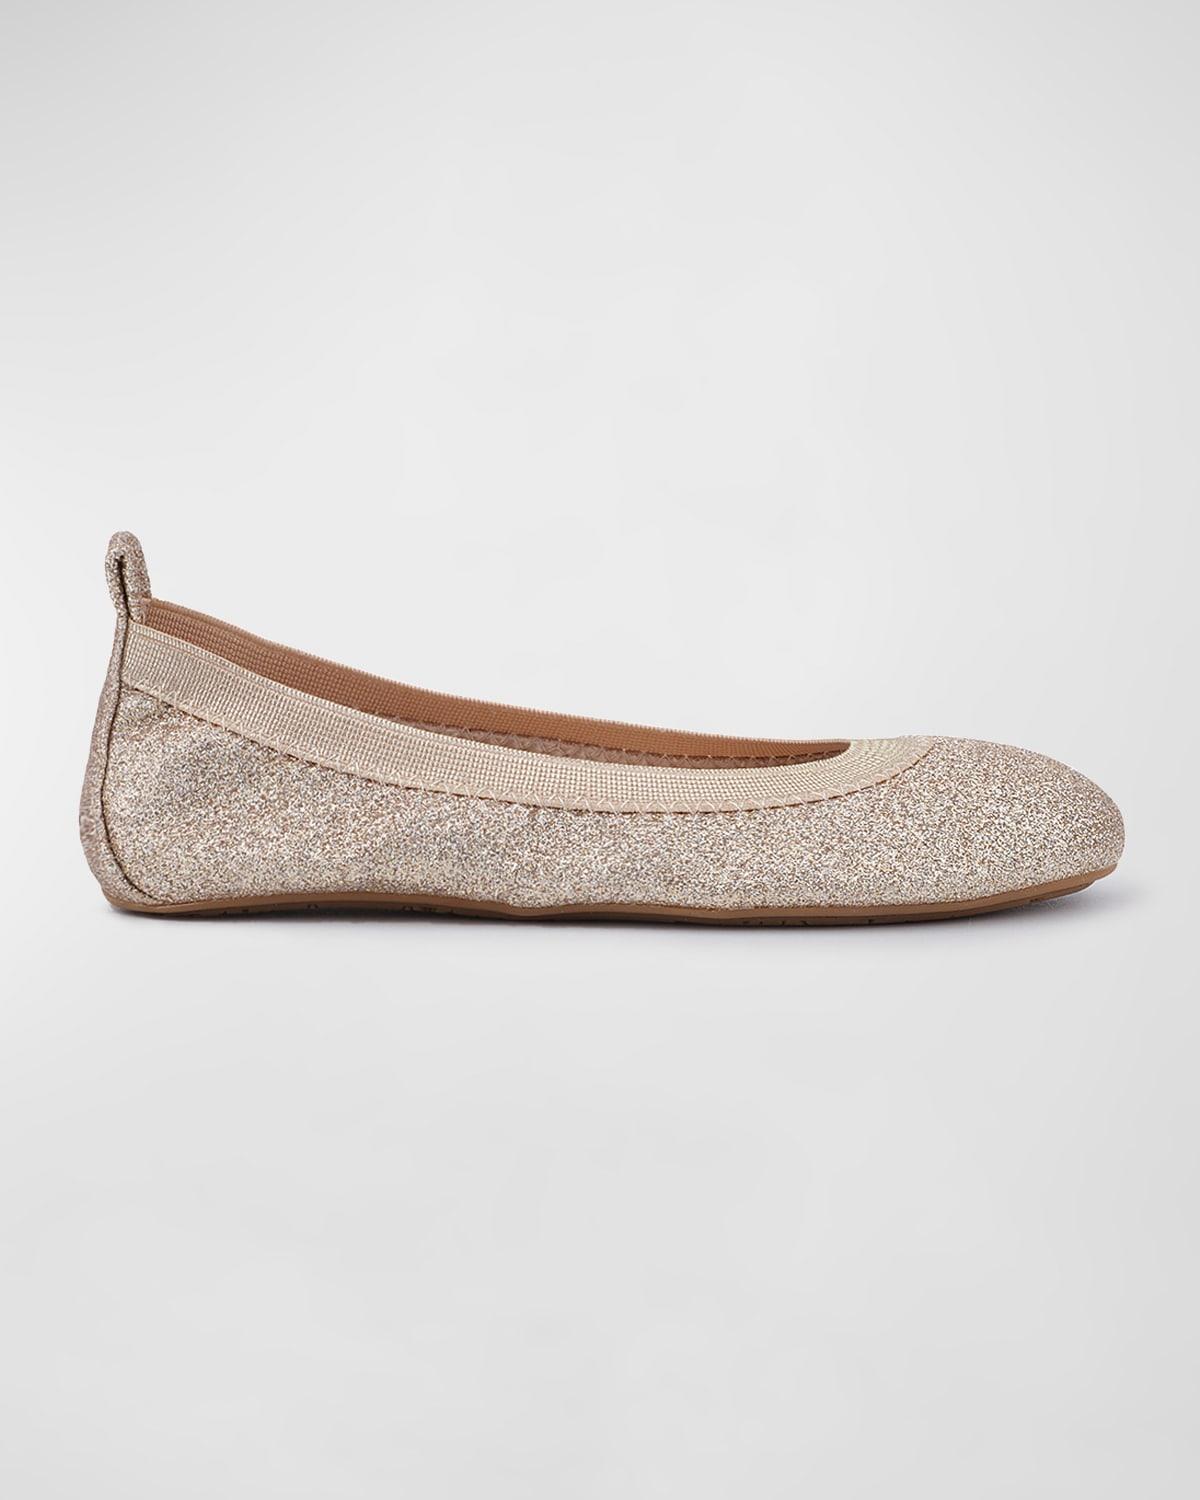 UGG(r) Ascot Leather Slipper Product Image